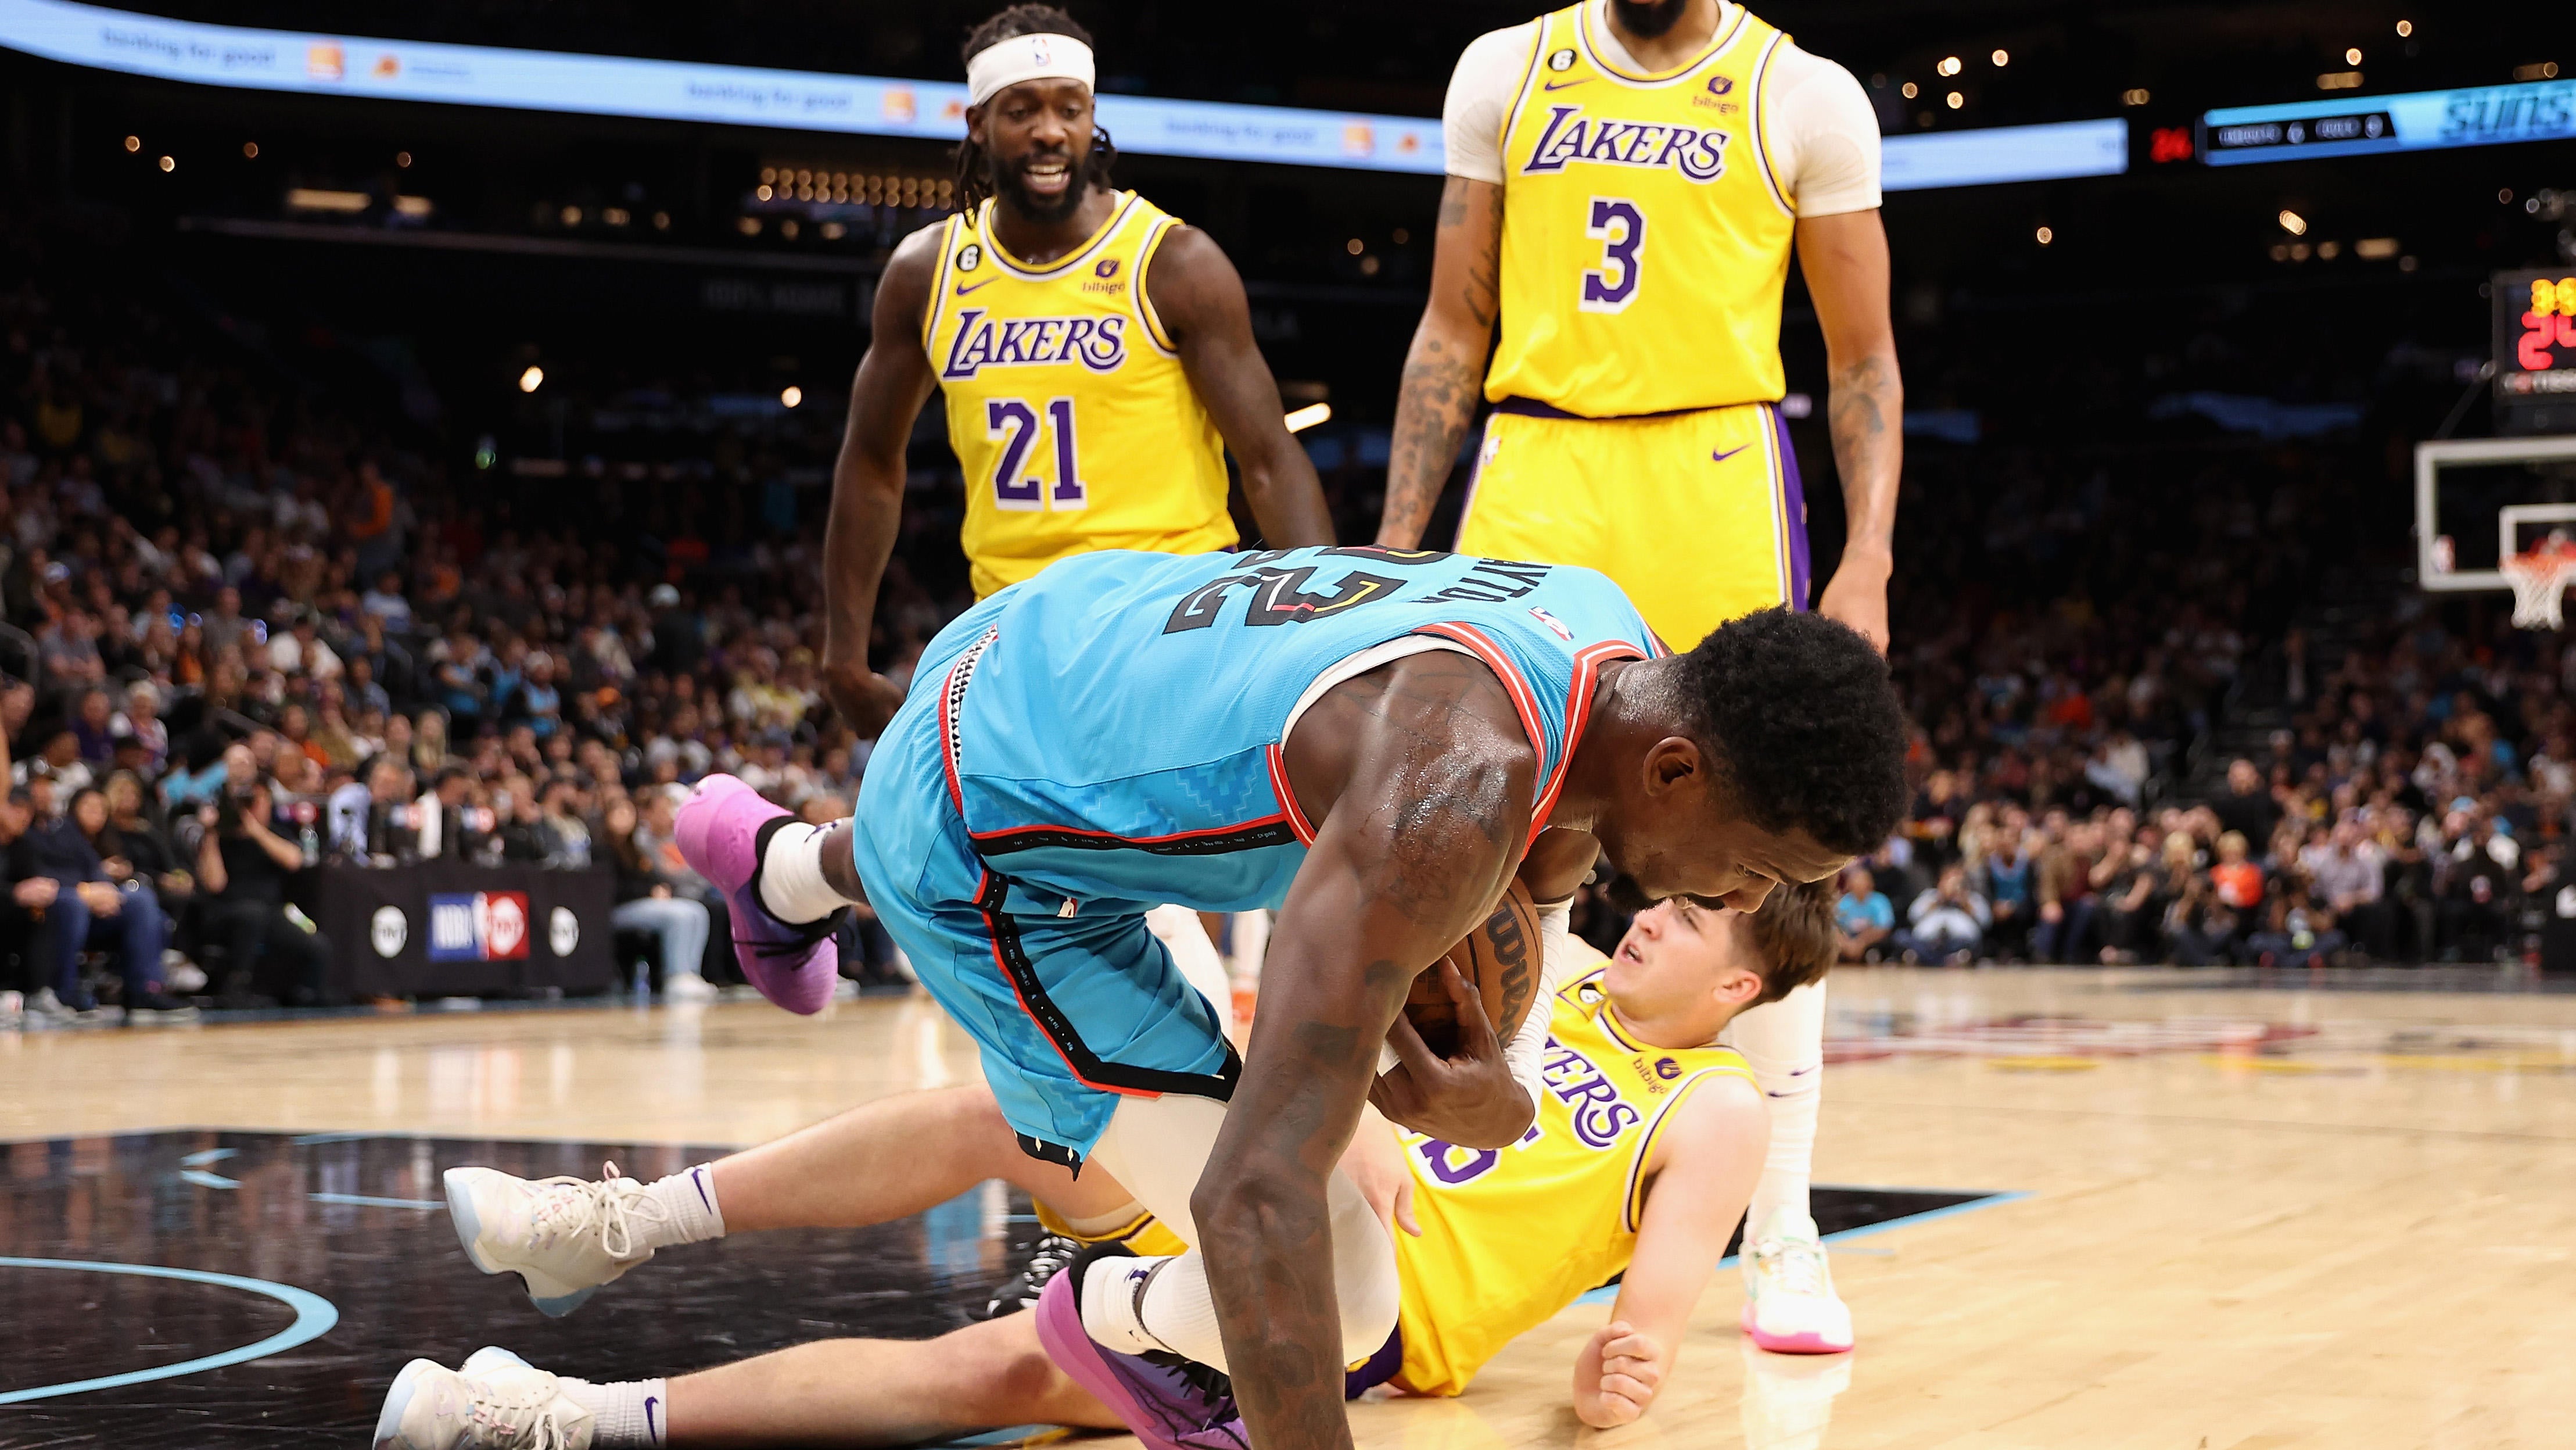 Lakers' Patrick Beverley says if he could do it over again, he would still shove Deandre Ayton: 'F--- him'